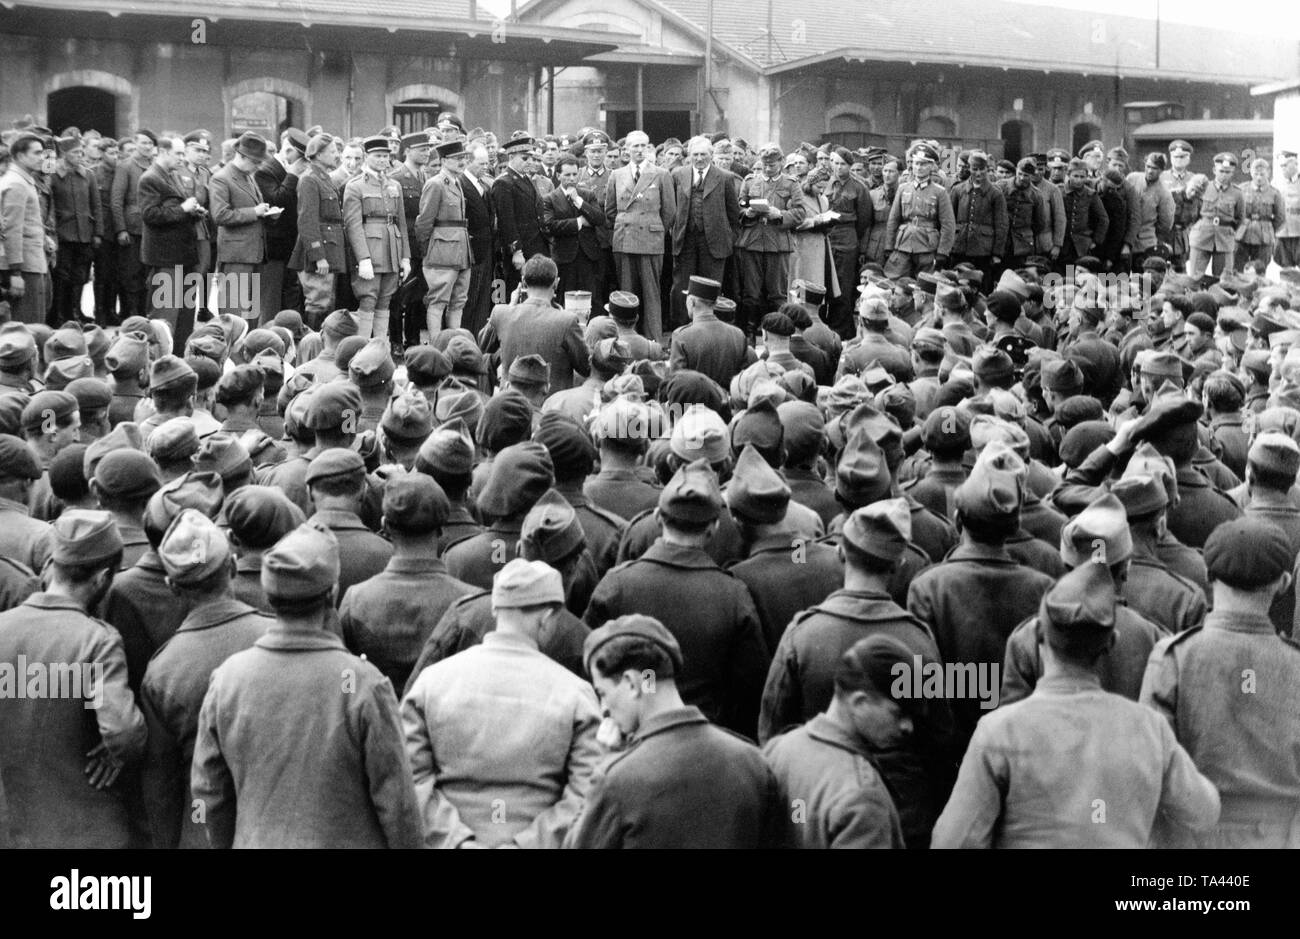 In Chalon-sur-Saone on the Franco-German demarcation lines arrive French prisoners of war who have been released from captivity because they have at least four children and are now repatriated. Ambassador Scapini gives a welcome speech on the podium. Stock Photo